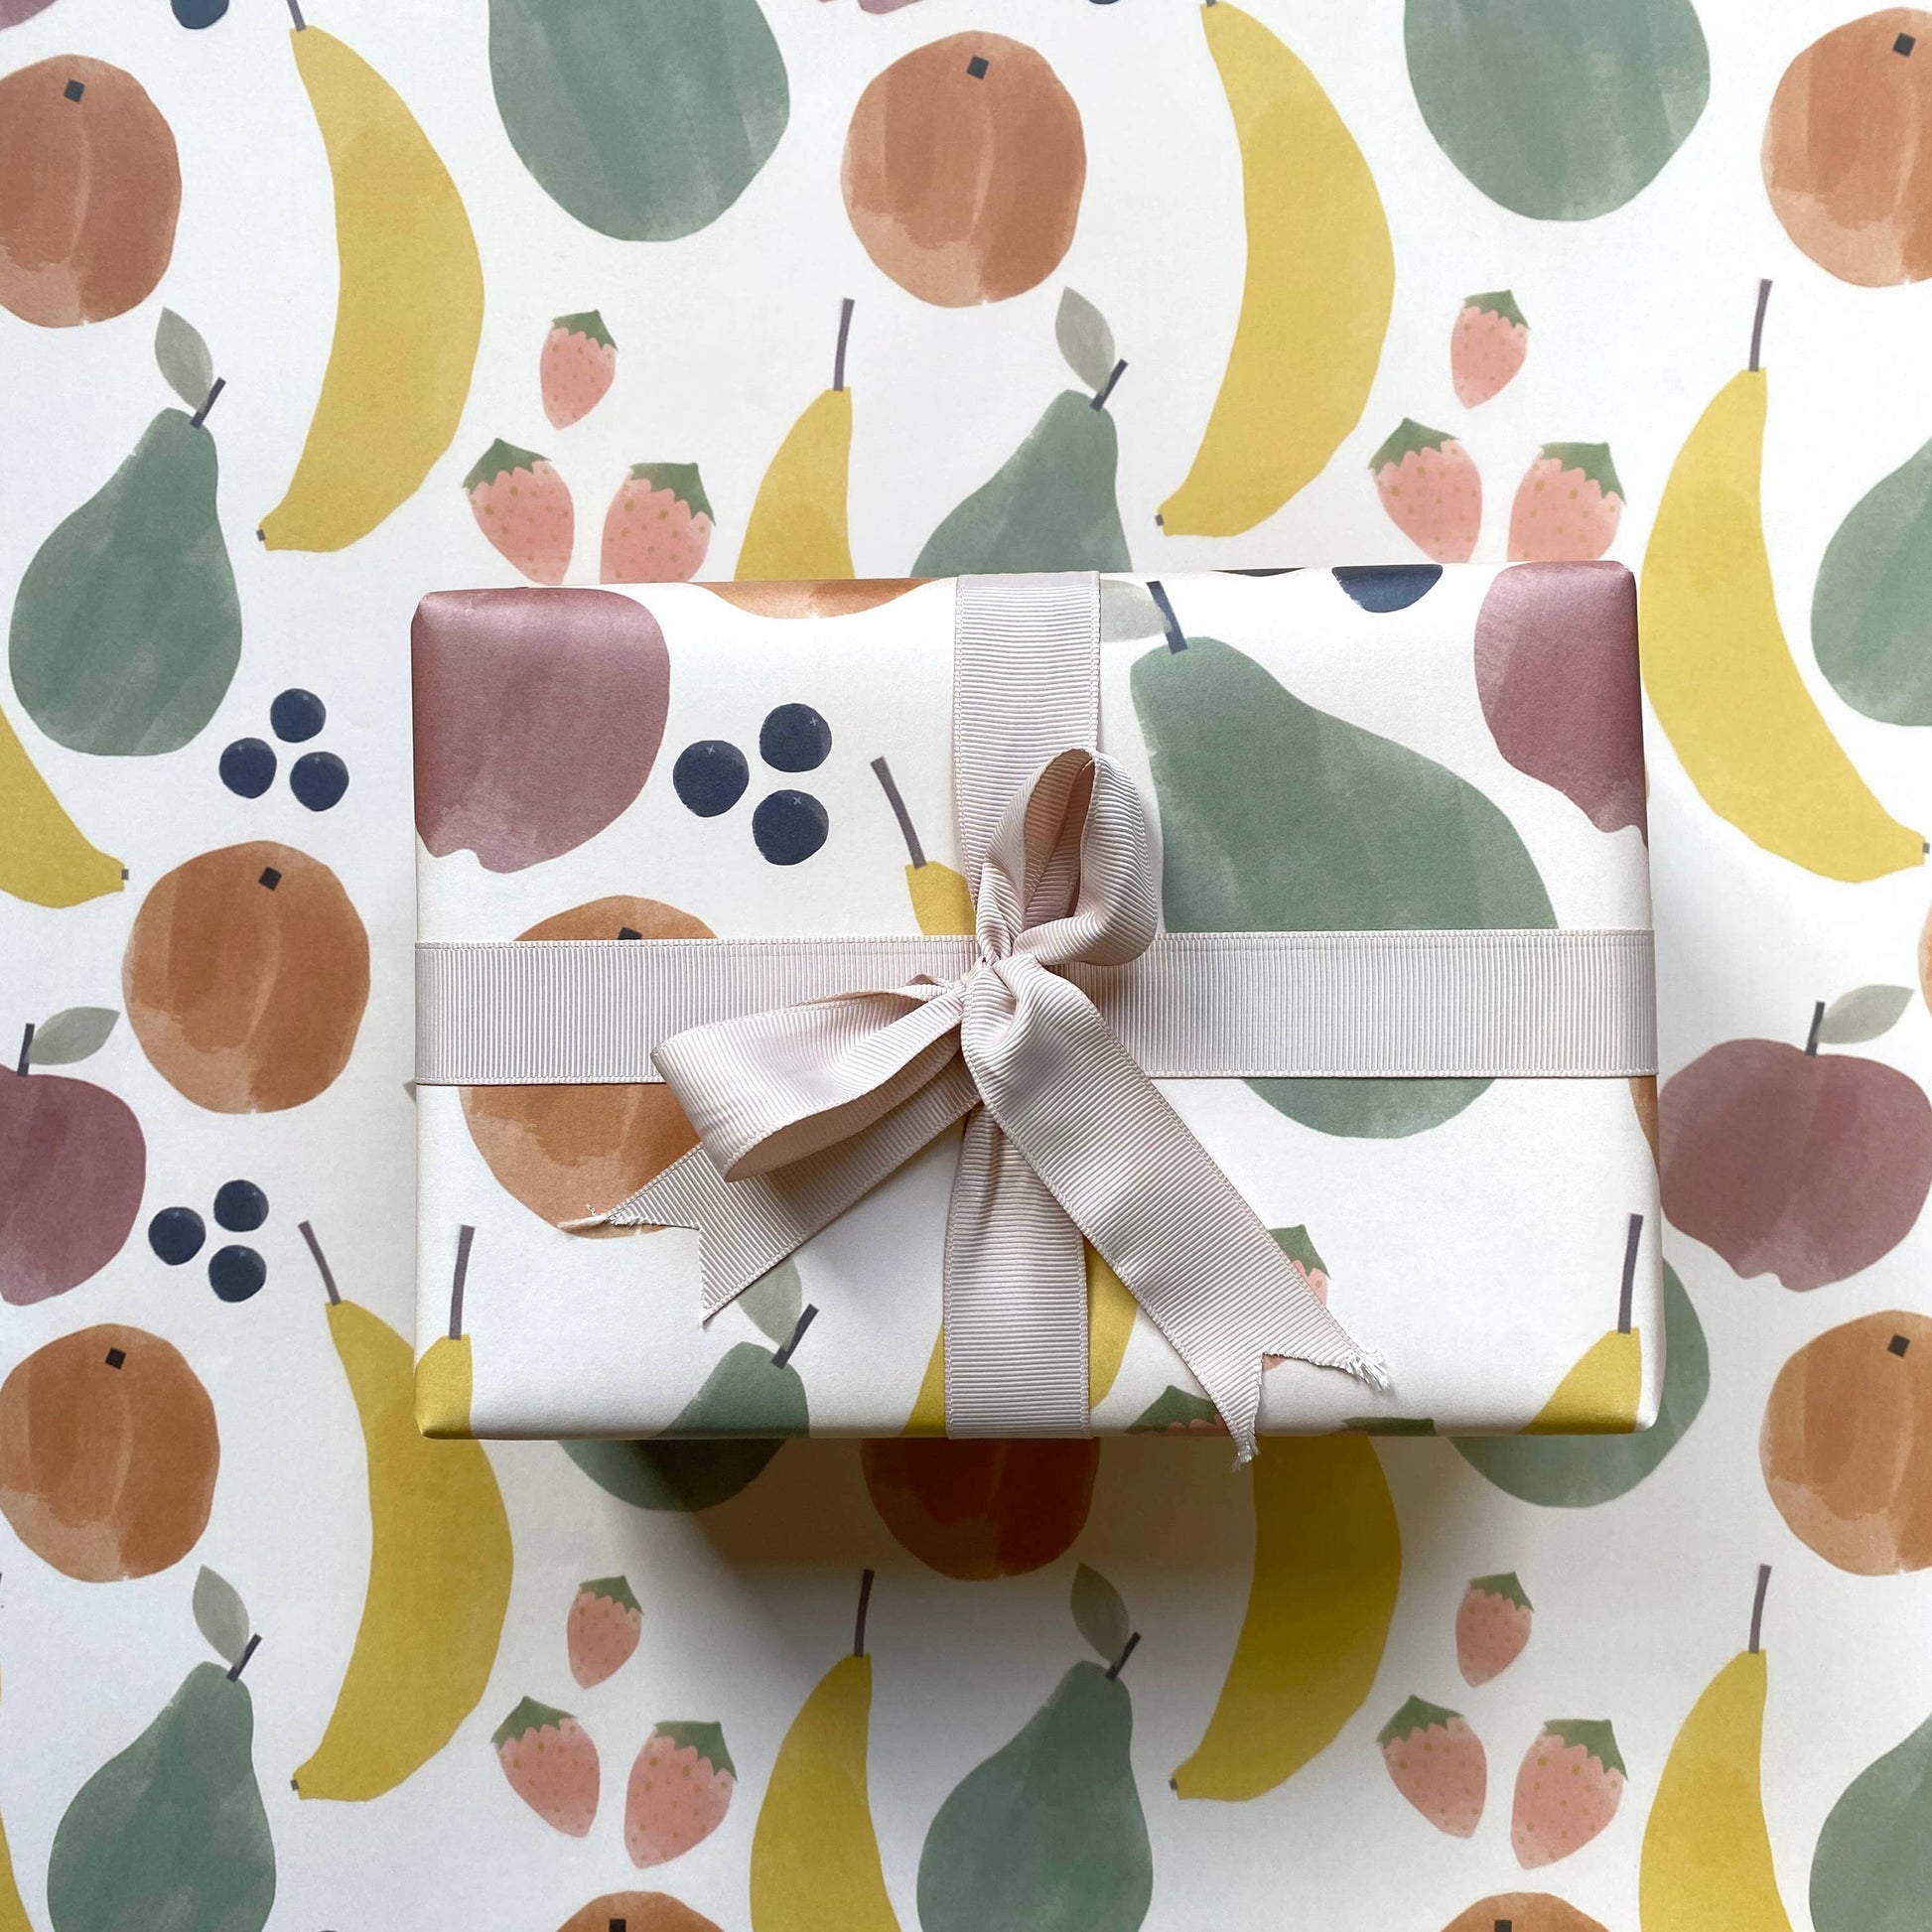 Sheet of wrapping paper with watercolor style fruit illustrations